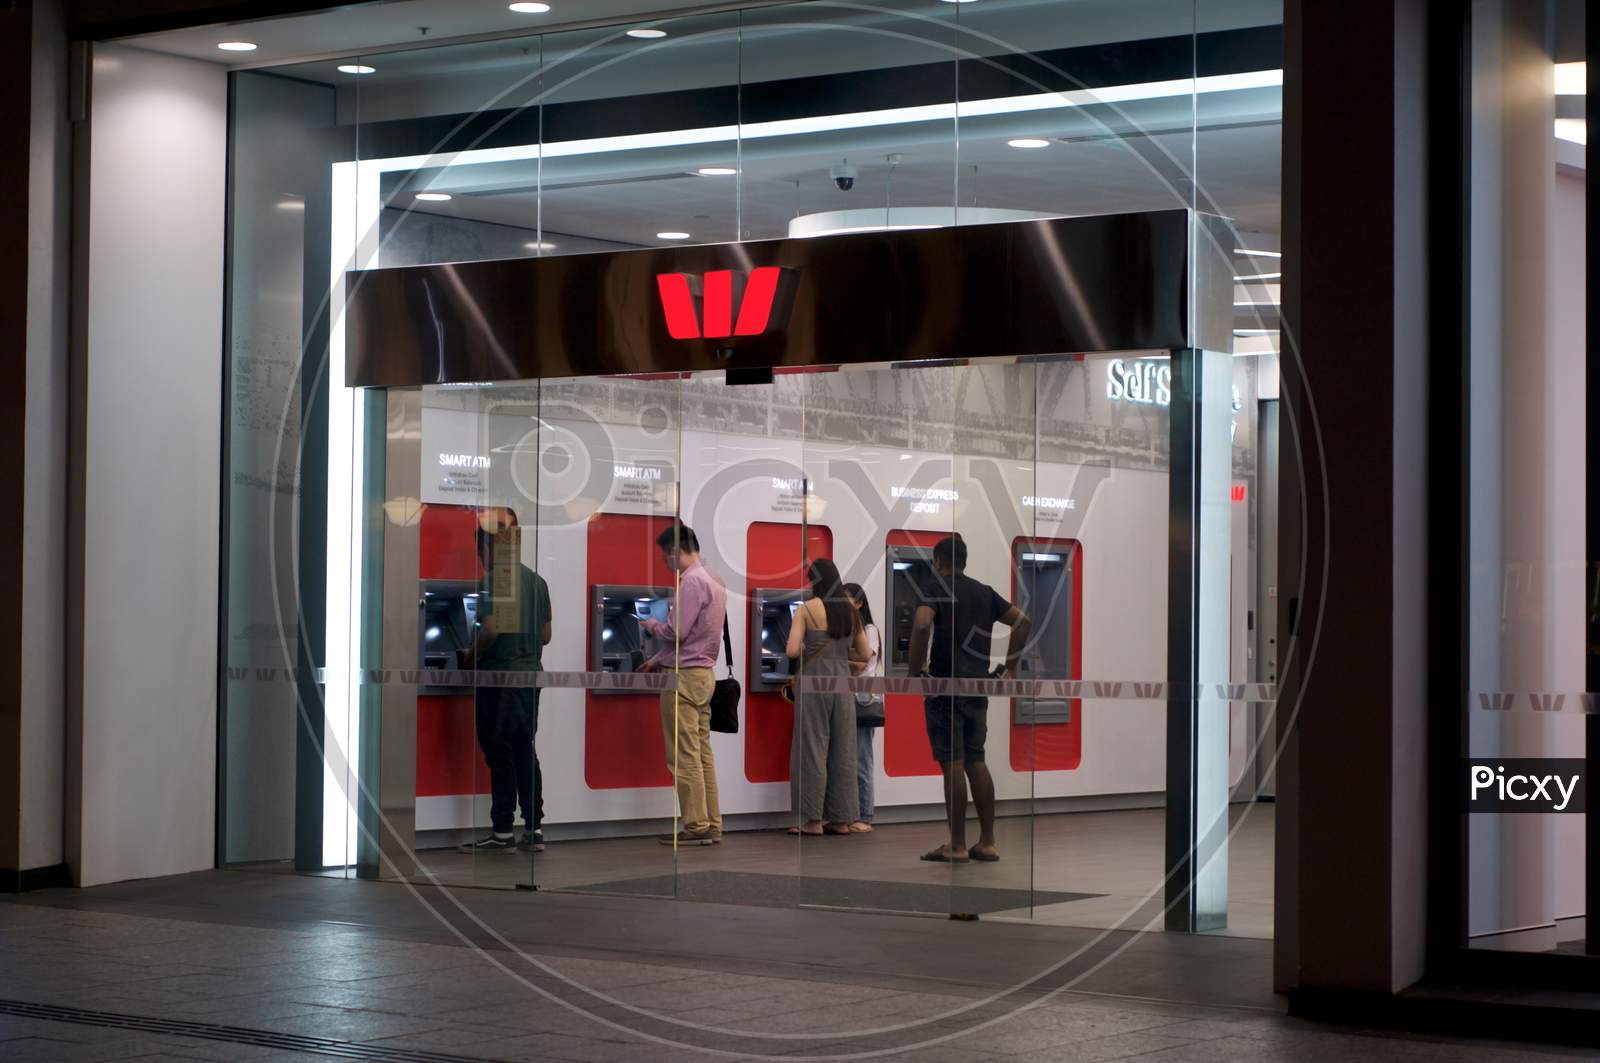 People At Westpac Bank Using Atm'S